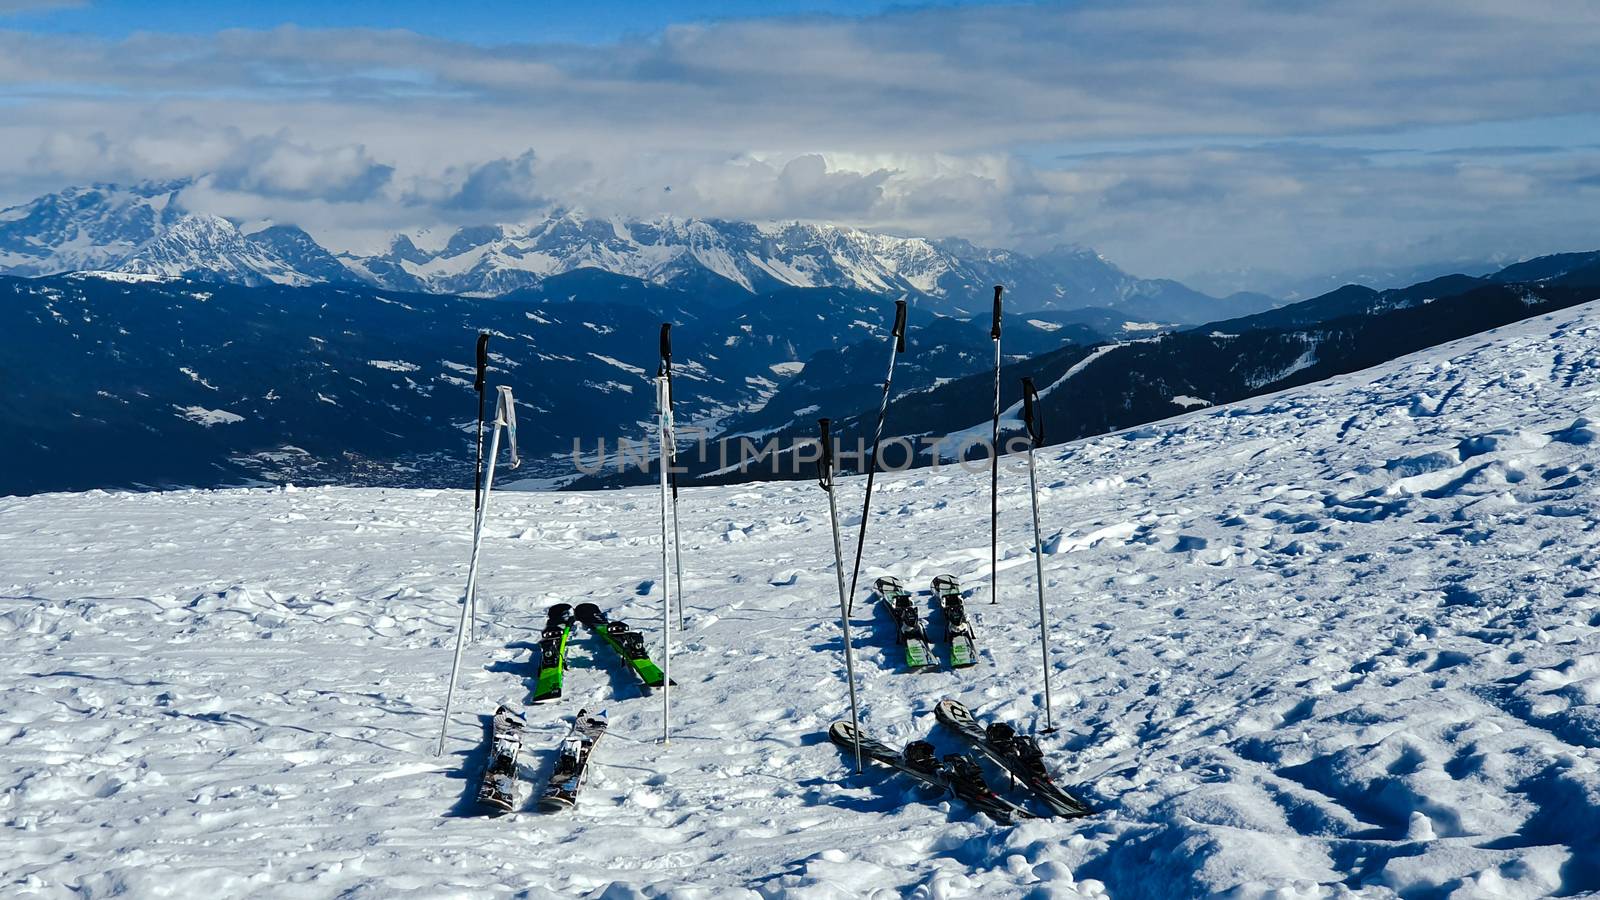 Skis In The Snow on Ski Piste With Against snowy Mountains